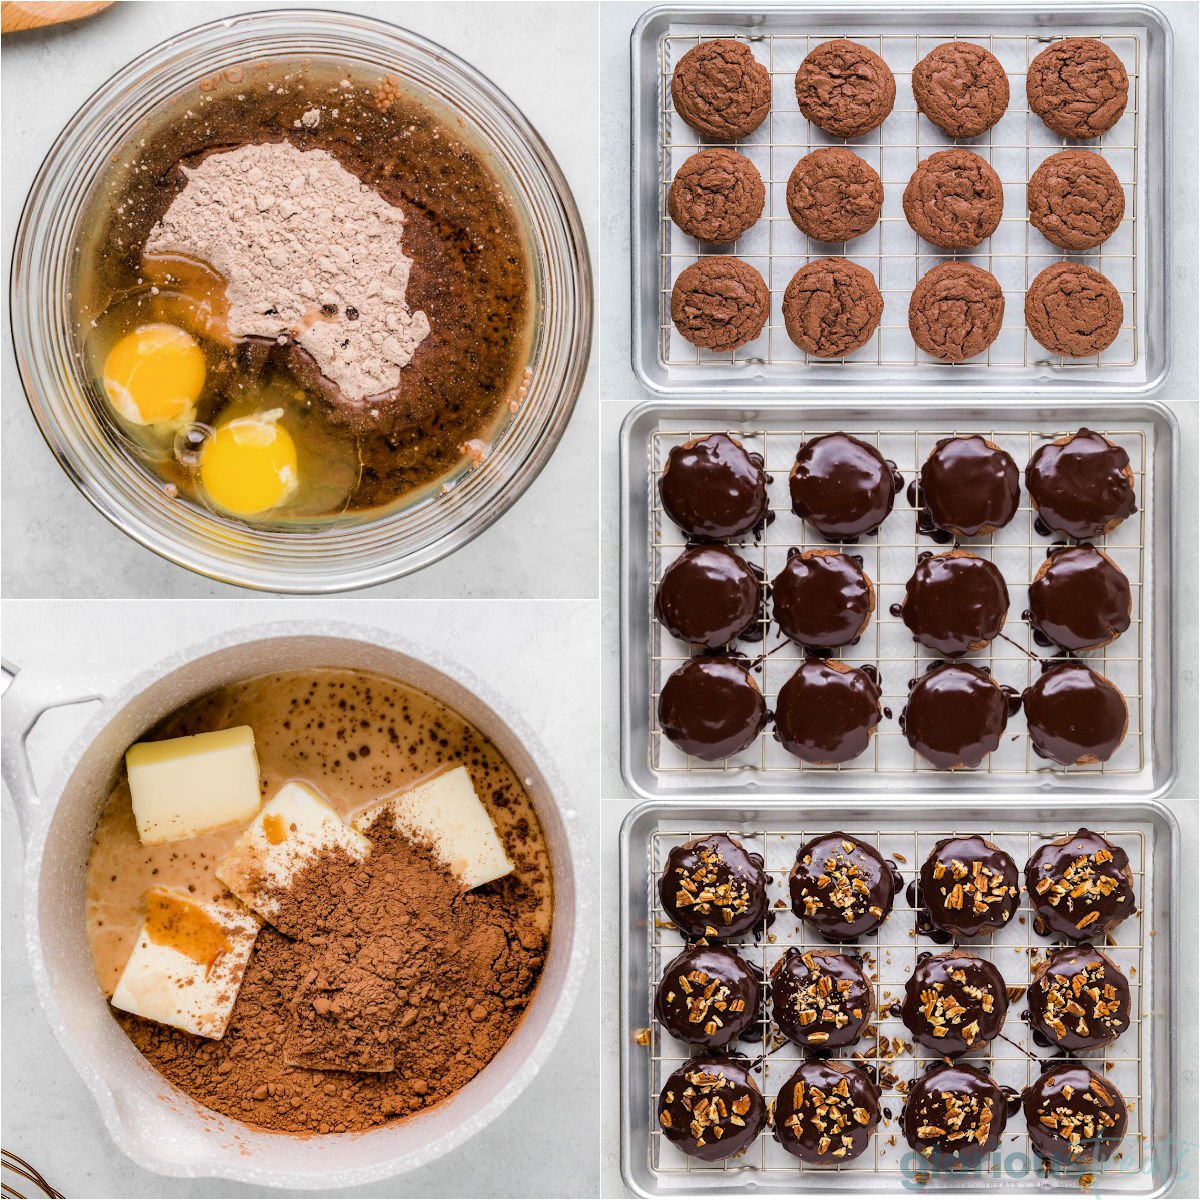 a collage of the steps to make the cookie recipe. a picture of ingredients being combined, a picture of dough in balls on baking tray, a picture of cookies frosted, and a a picture of the finished cookies with nuts on top